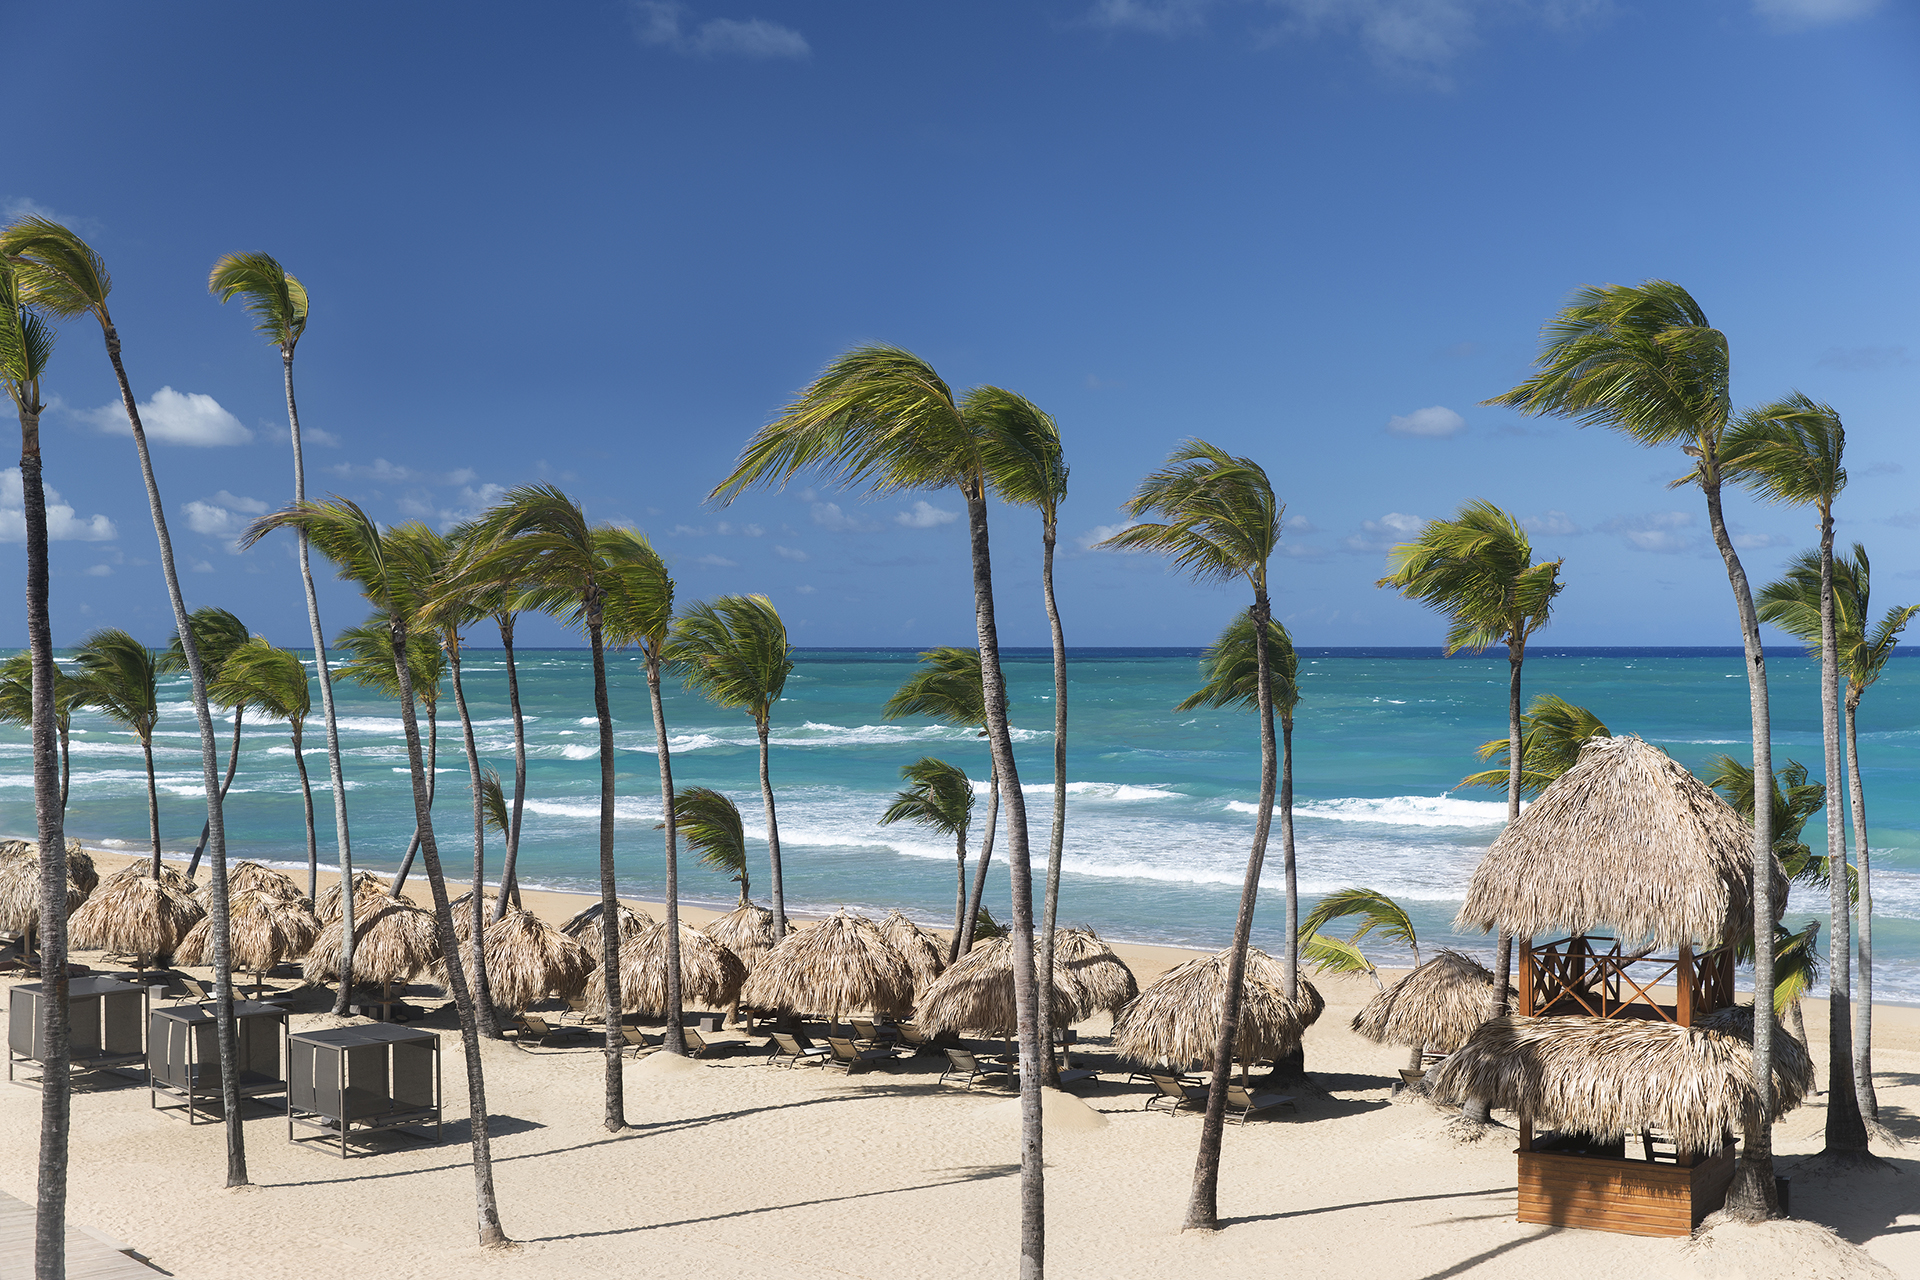 View of the ocean from an All Inclusive resort in Punta Cana